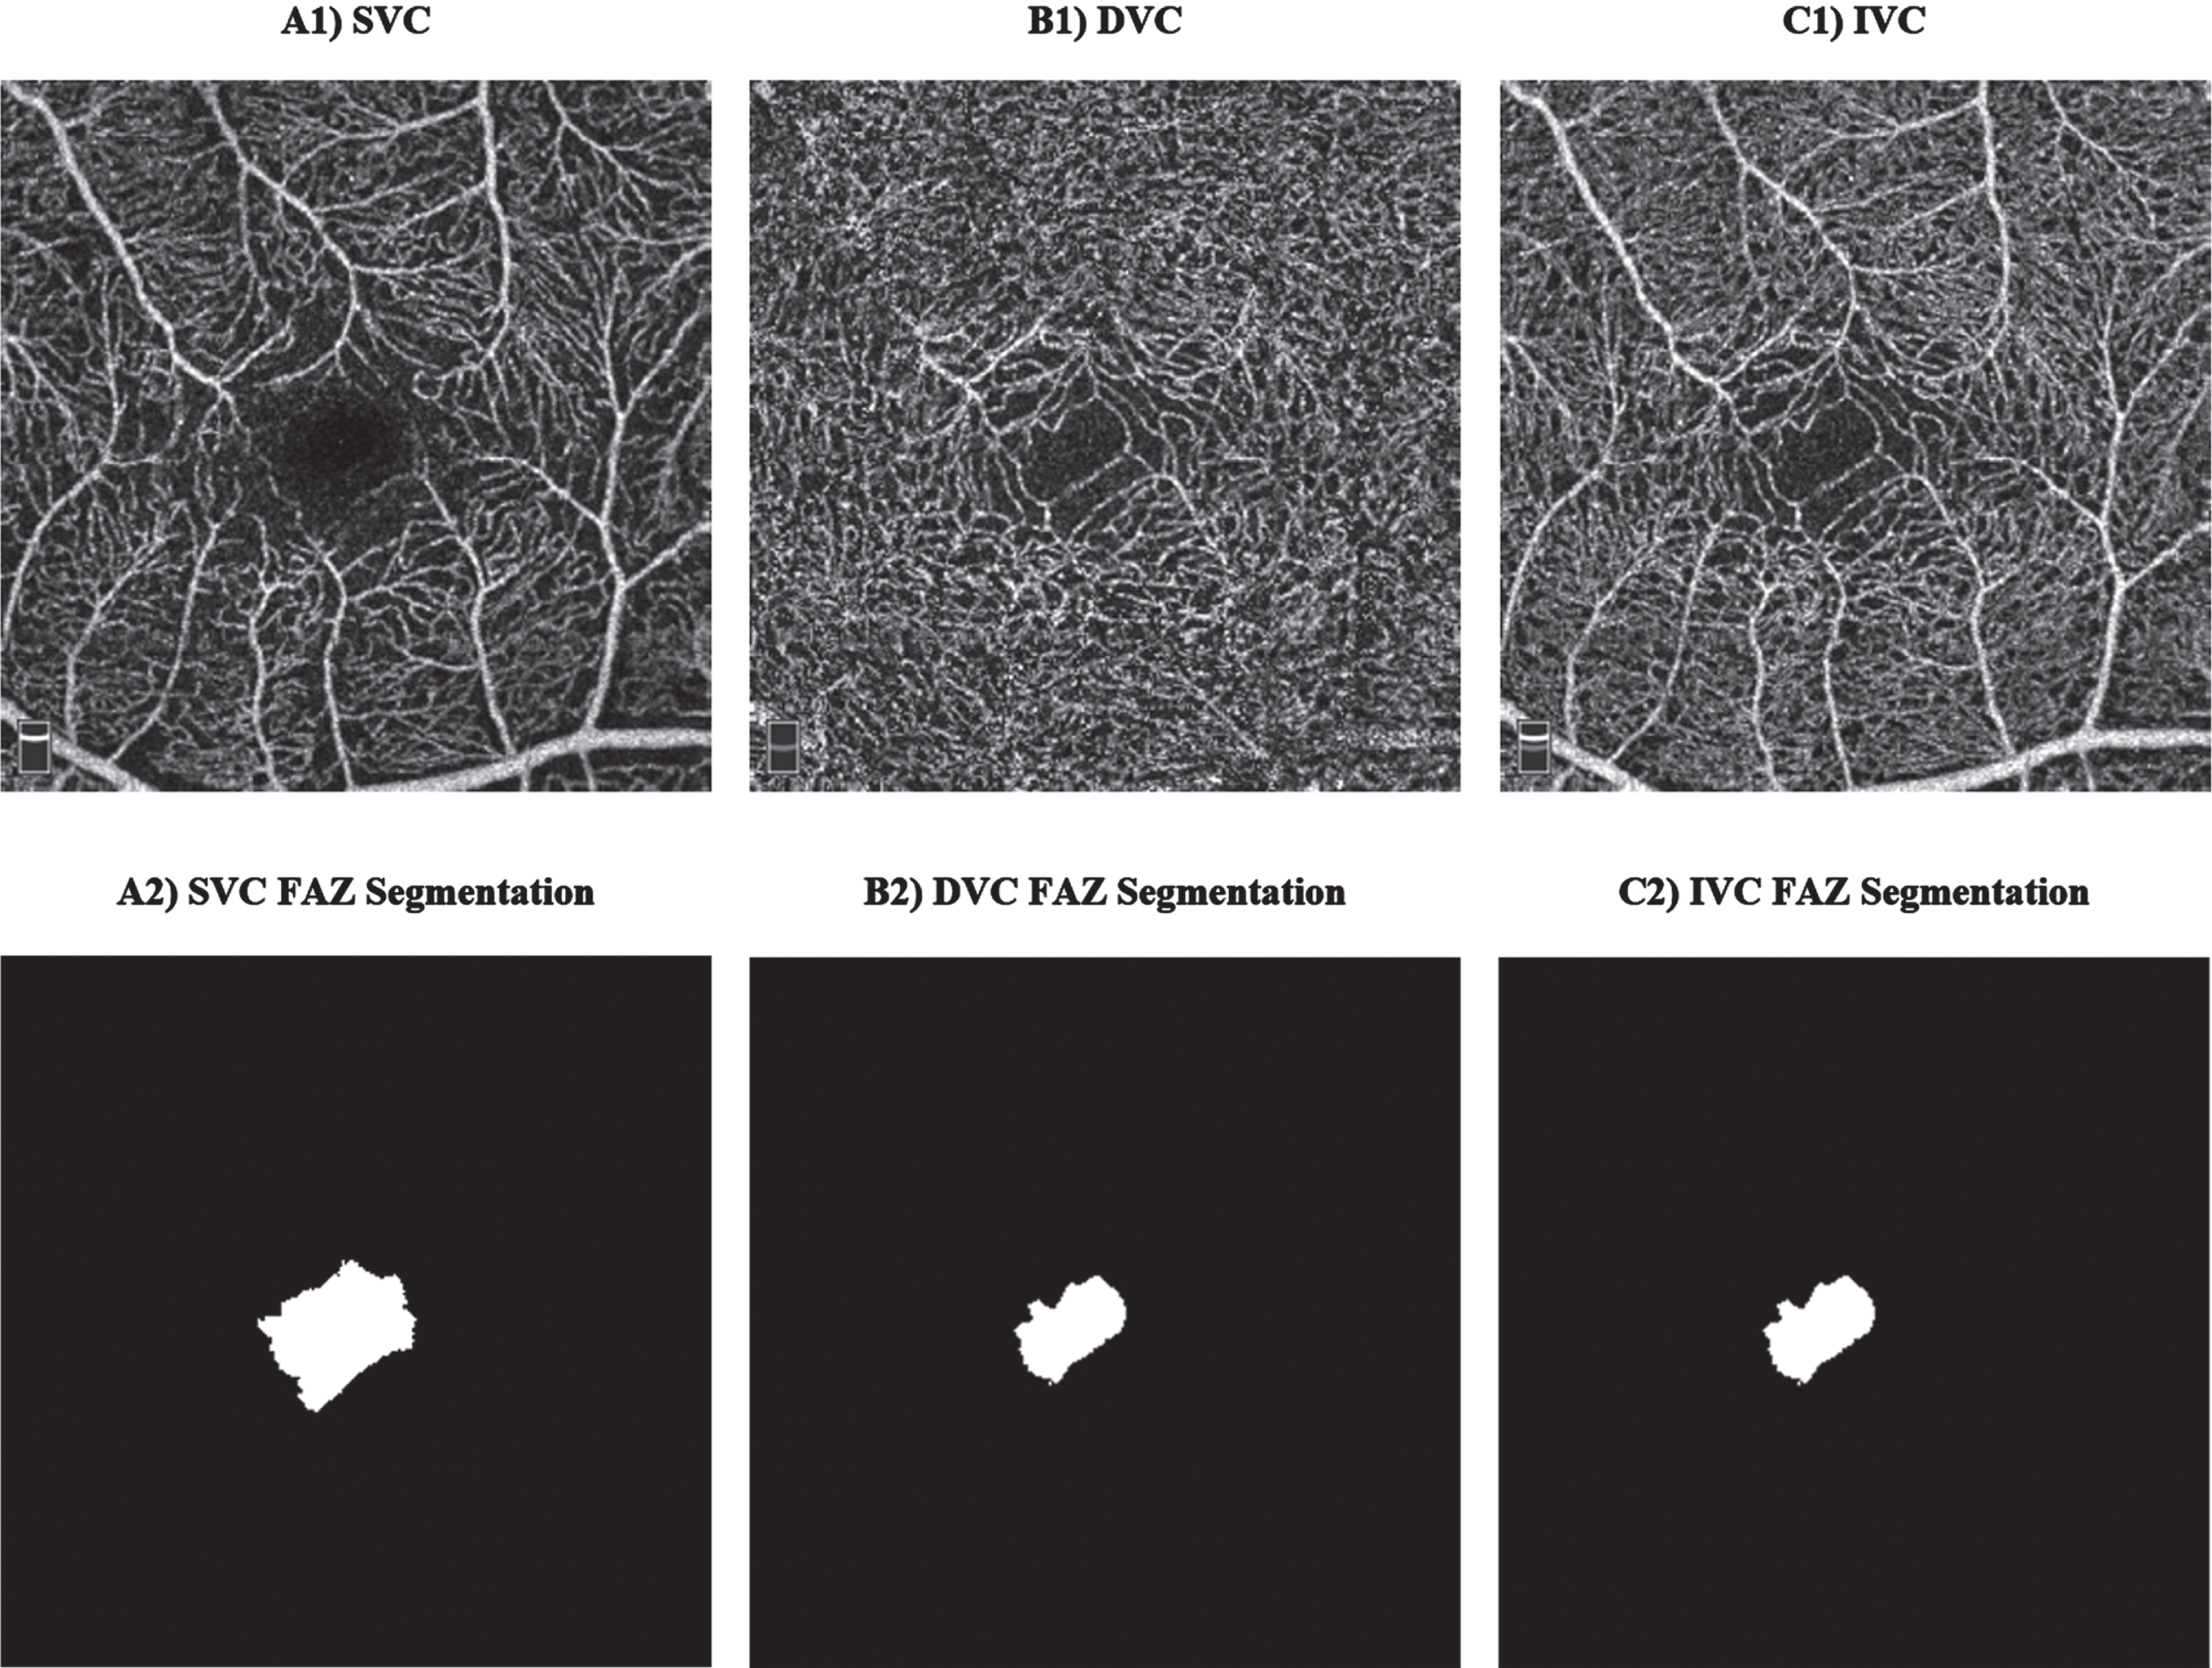 Examples of optical coherence tomography angiography (OCTA) scans: A1) superficial vascular complex (SVC), B1) deep vascular complex (DVC), C1) inner vascular complex (IVC), and their corresponding manual foveal avascular zone (FAZ) segmentation.